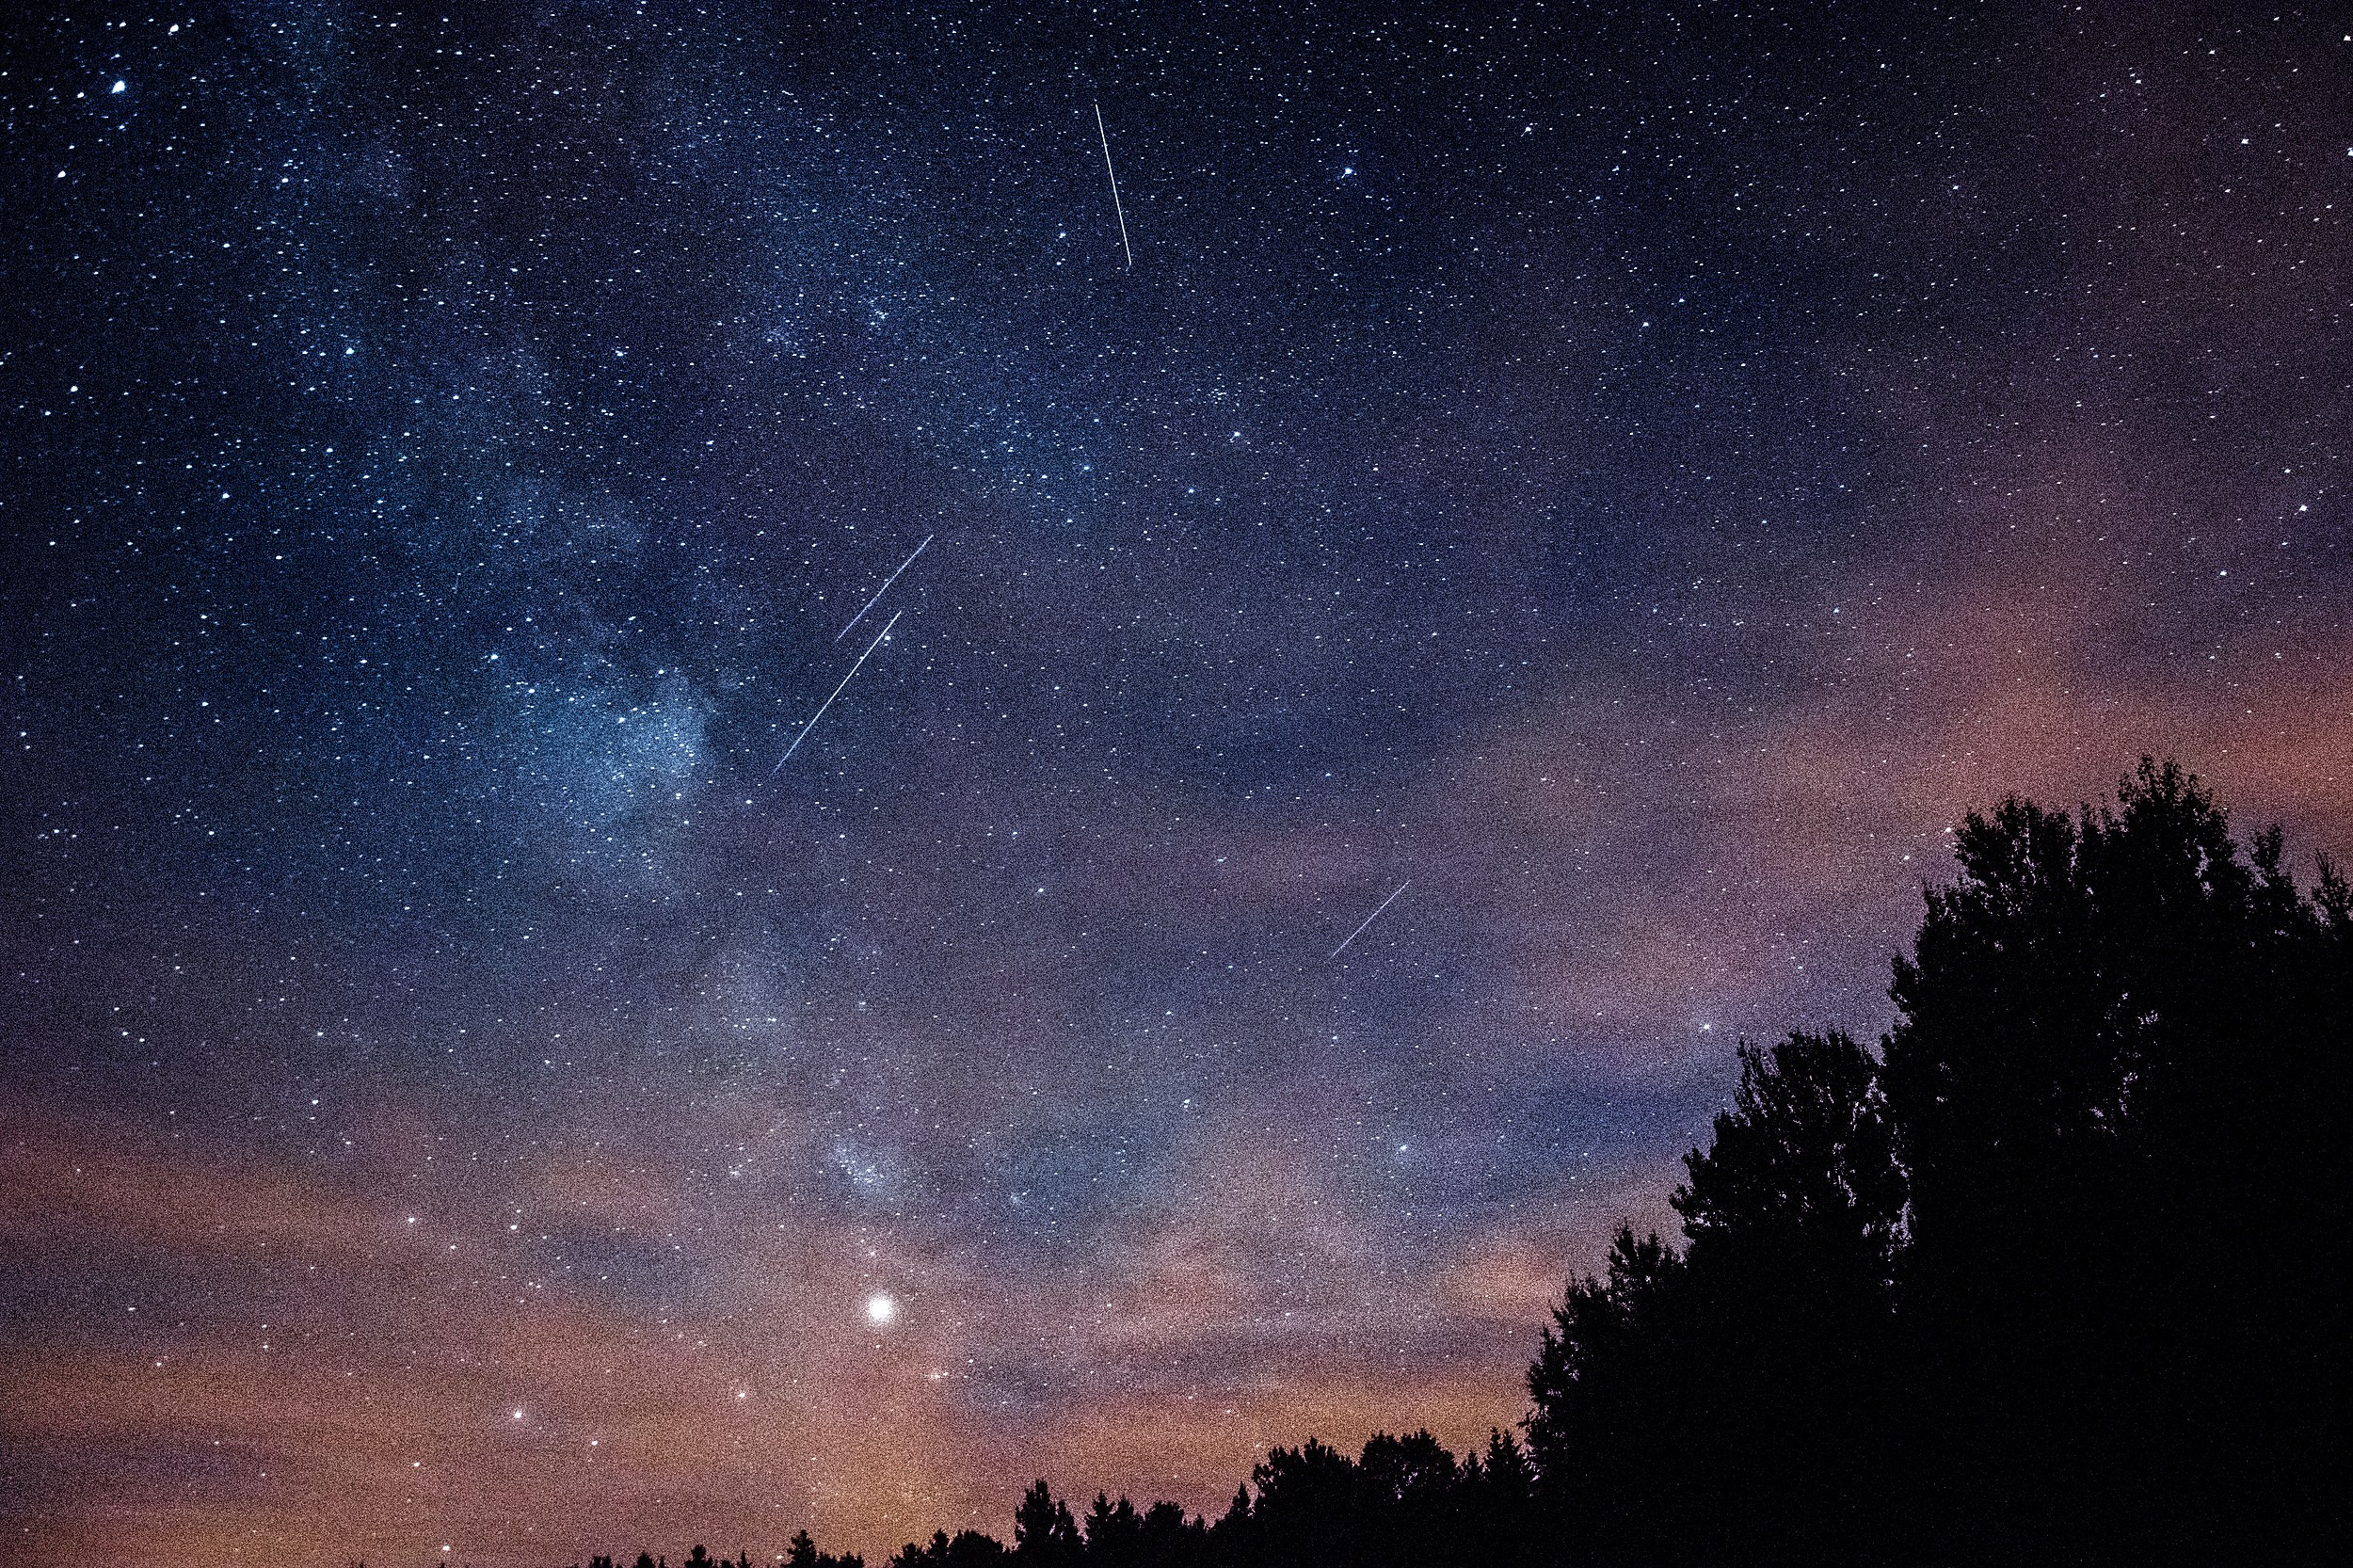 Best meteor shower of the year in Michigan? This weekend!